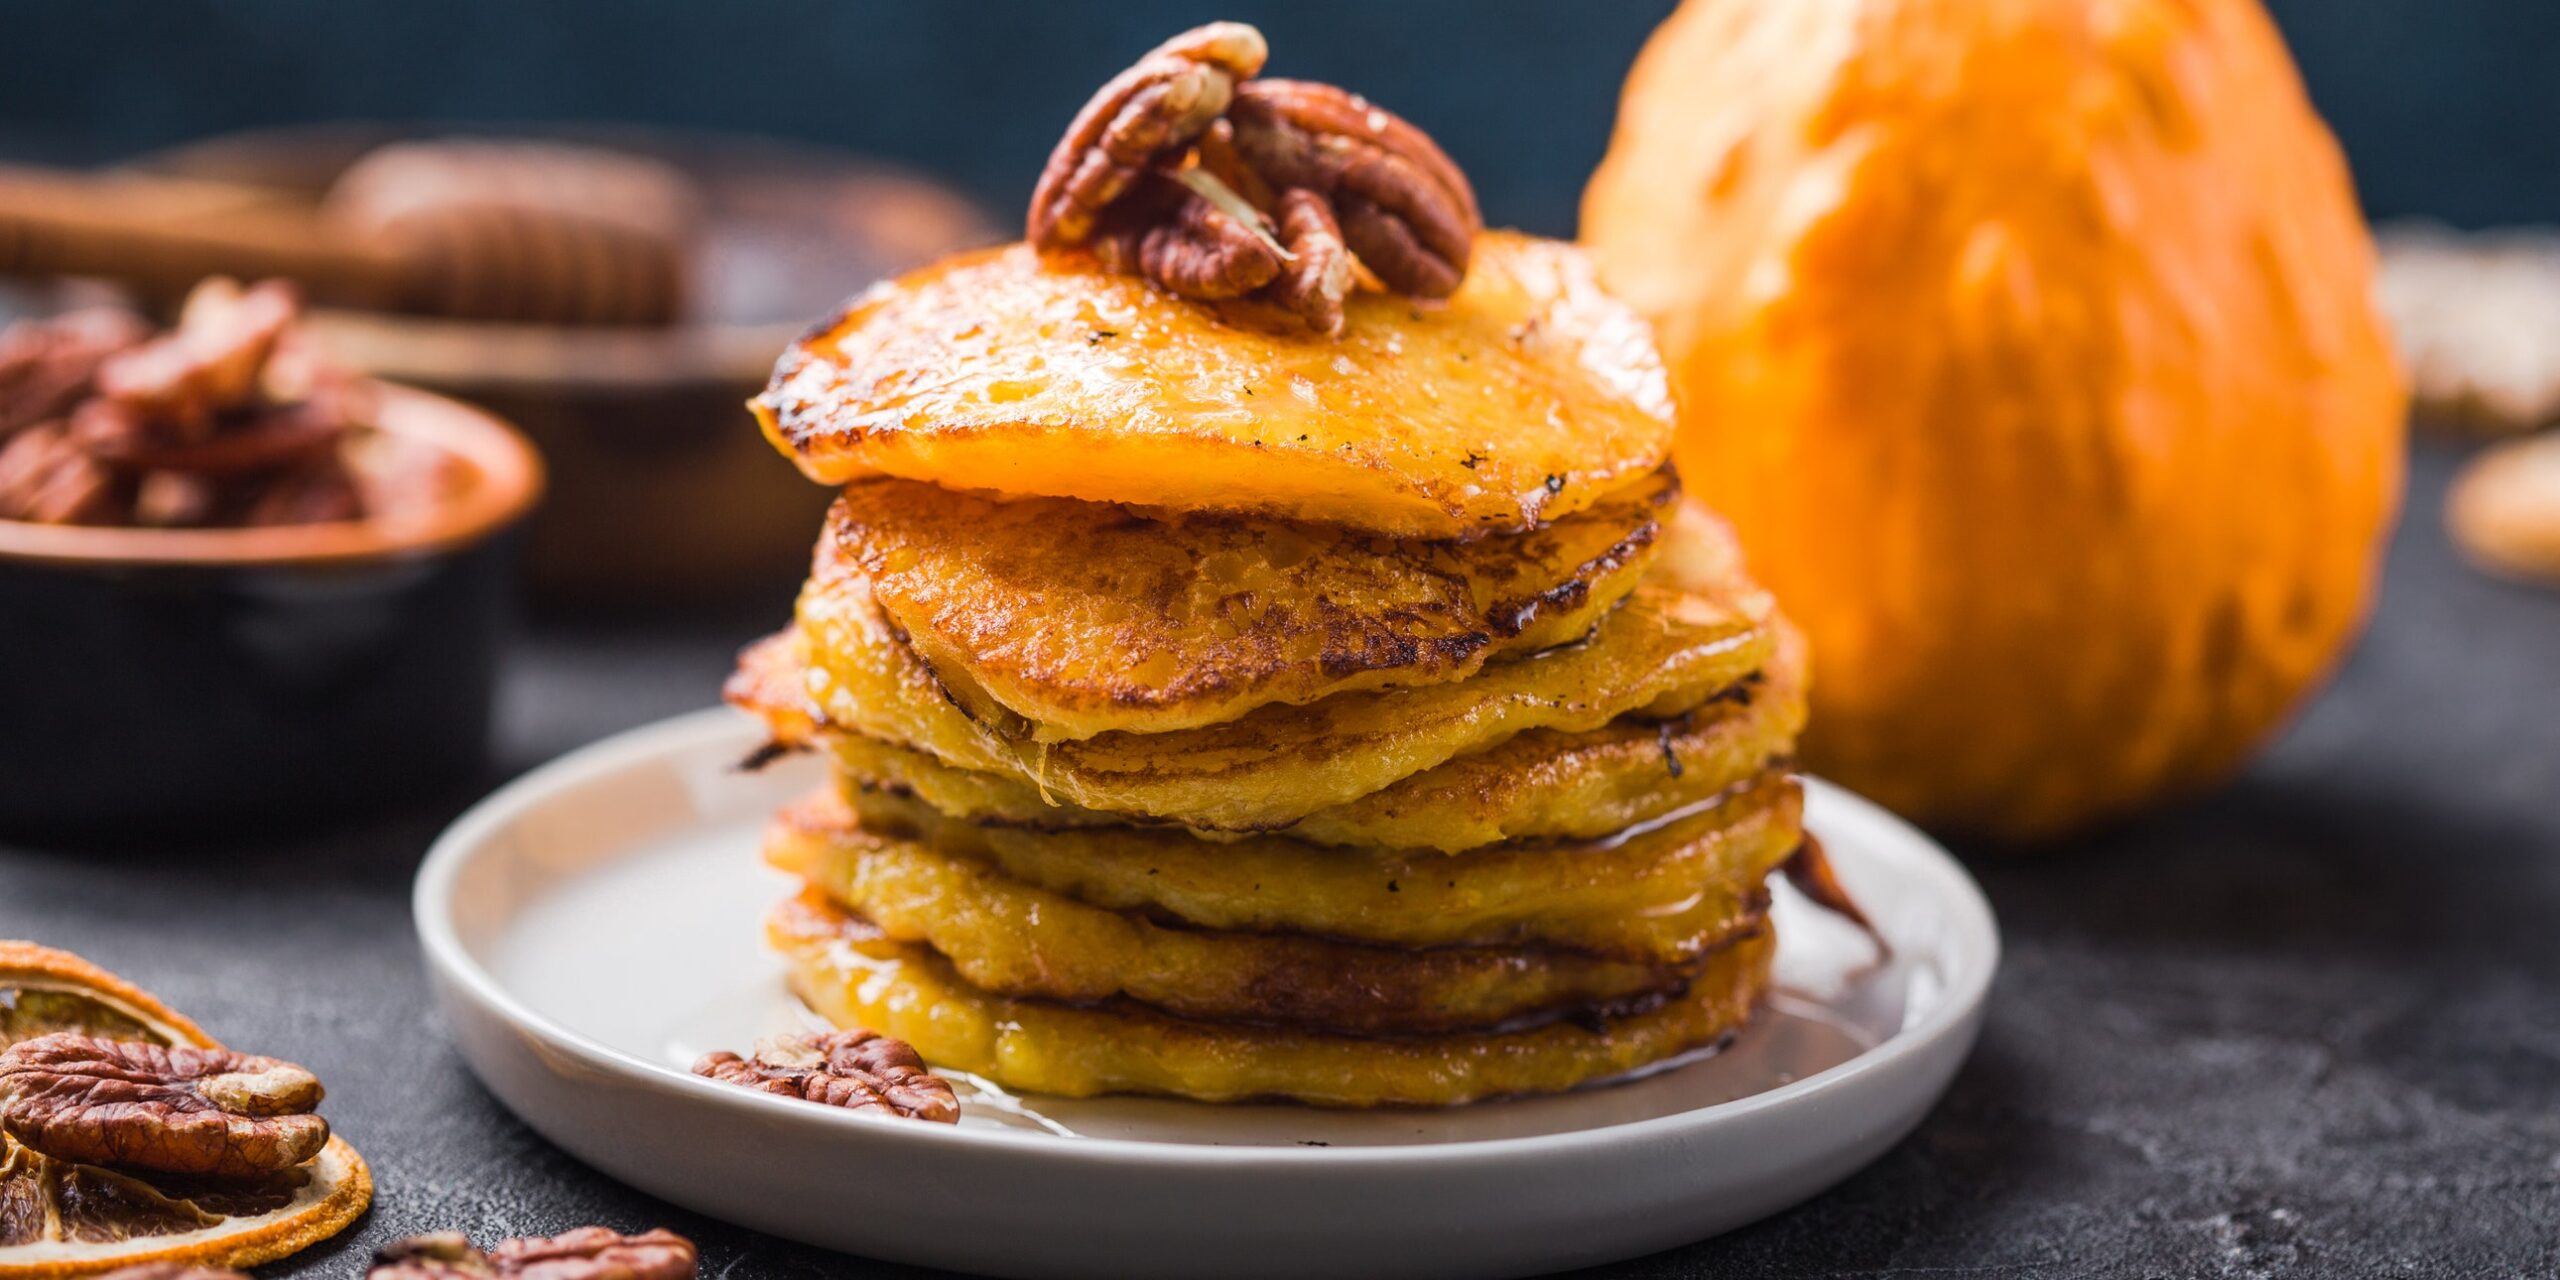 33 Tasty Pumpkin Recipes That Are Perfect for Fall